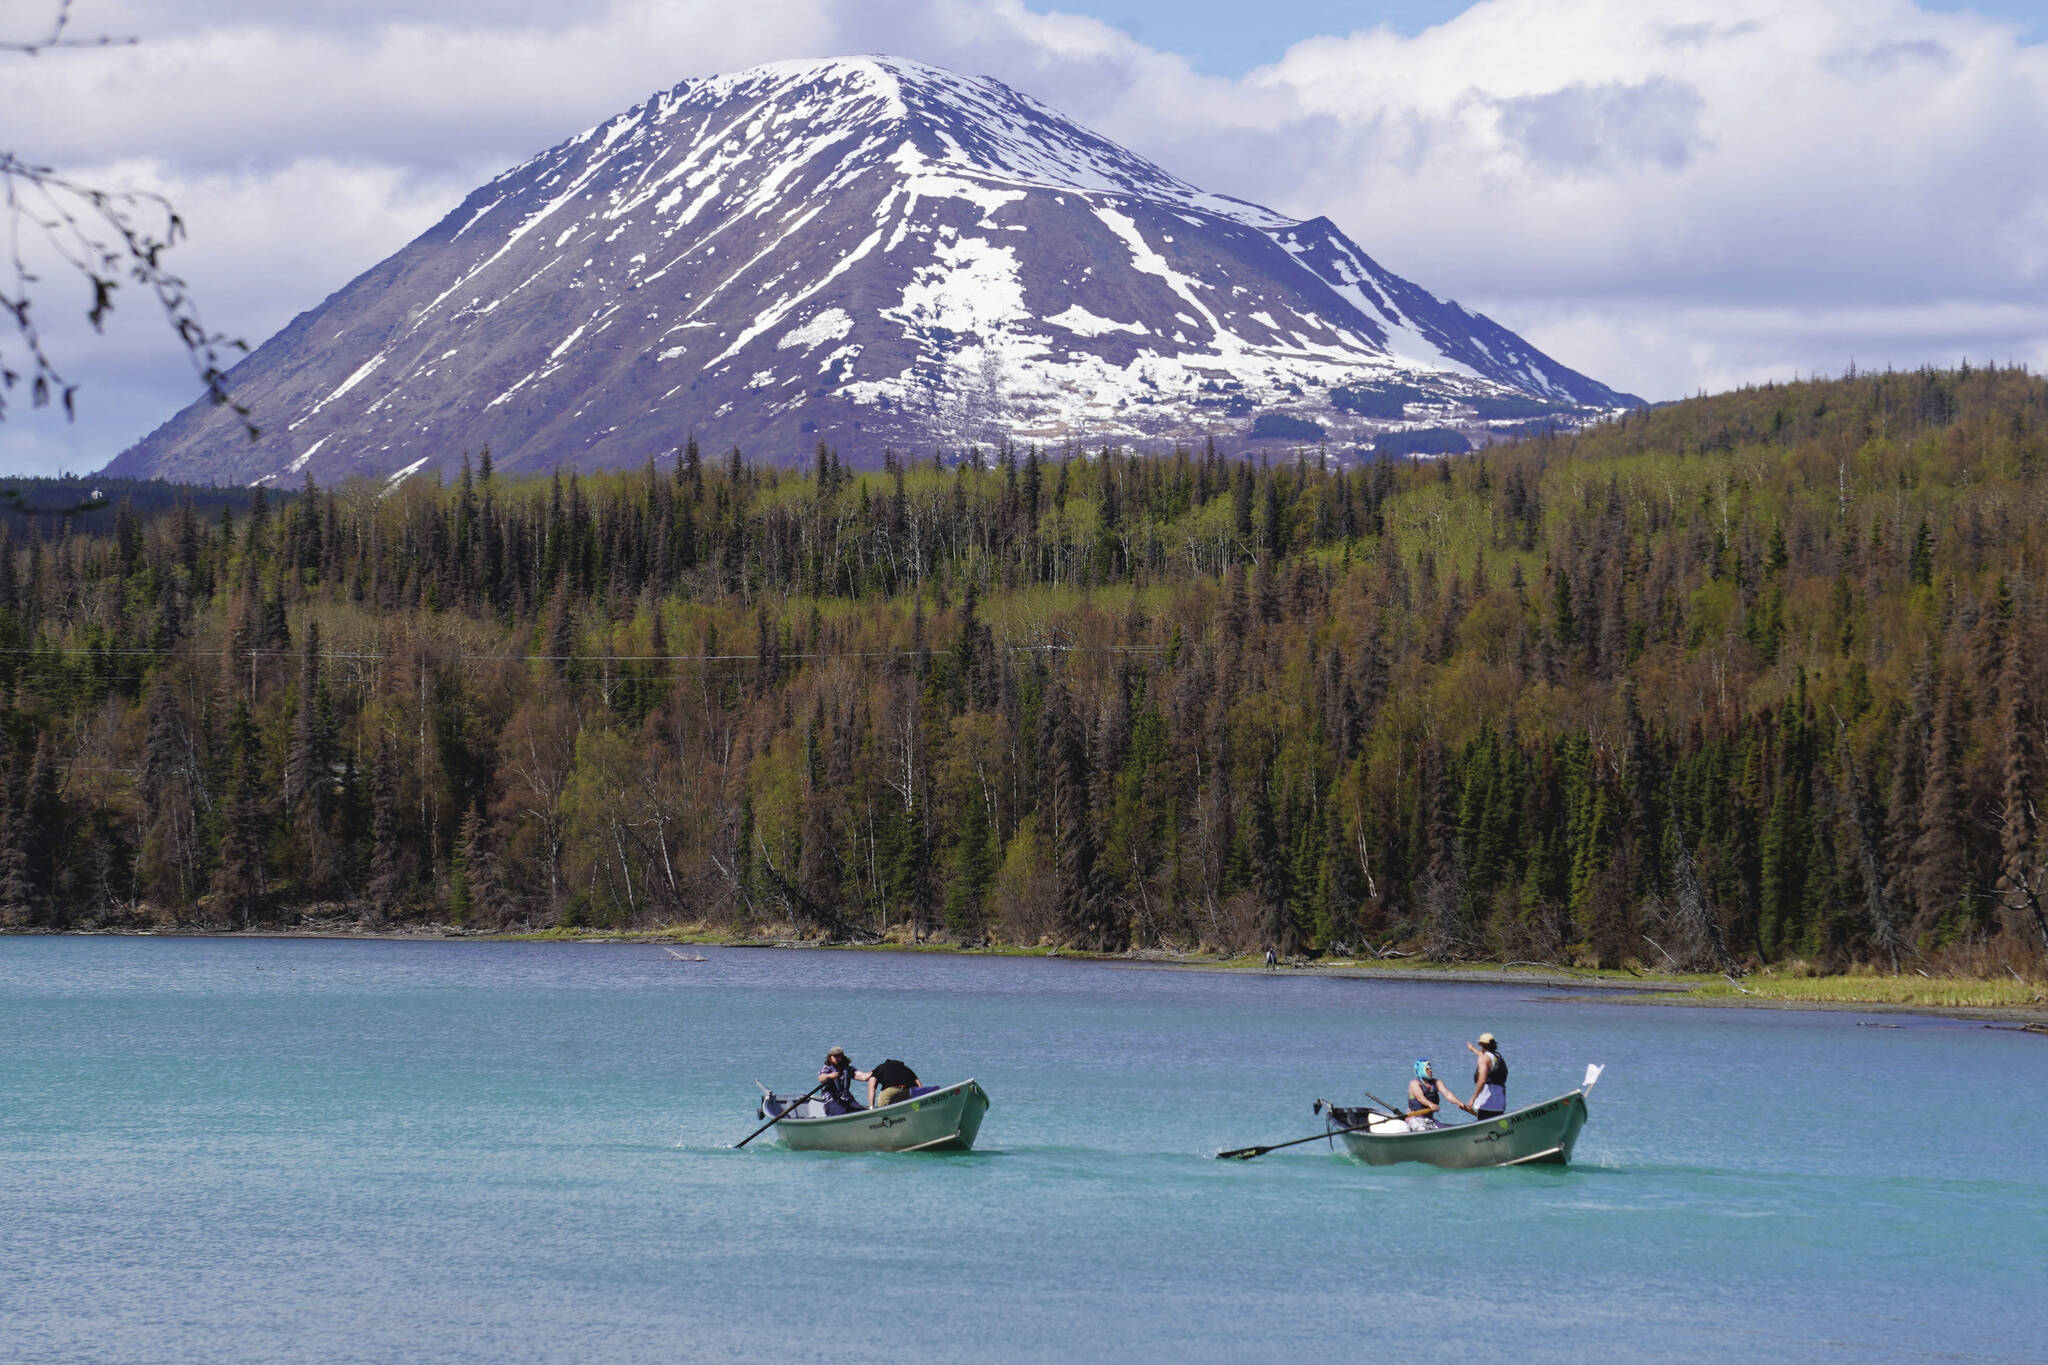 Contestants race down the Kenai River during the 16th Annual Cooper Landing Drift Boat Regata near the Eagle Landing Resort in Cooper Landing, Alaska on Saturday, May 20, 2023. (Jake Dye/Peninsula Clarion)